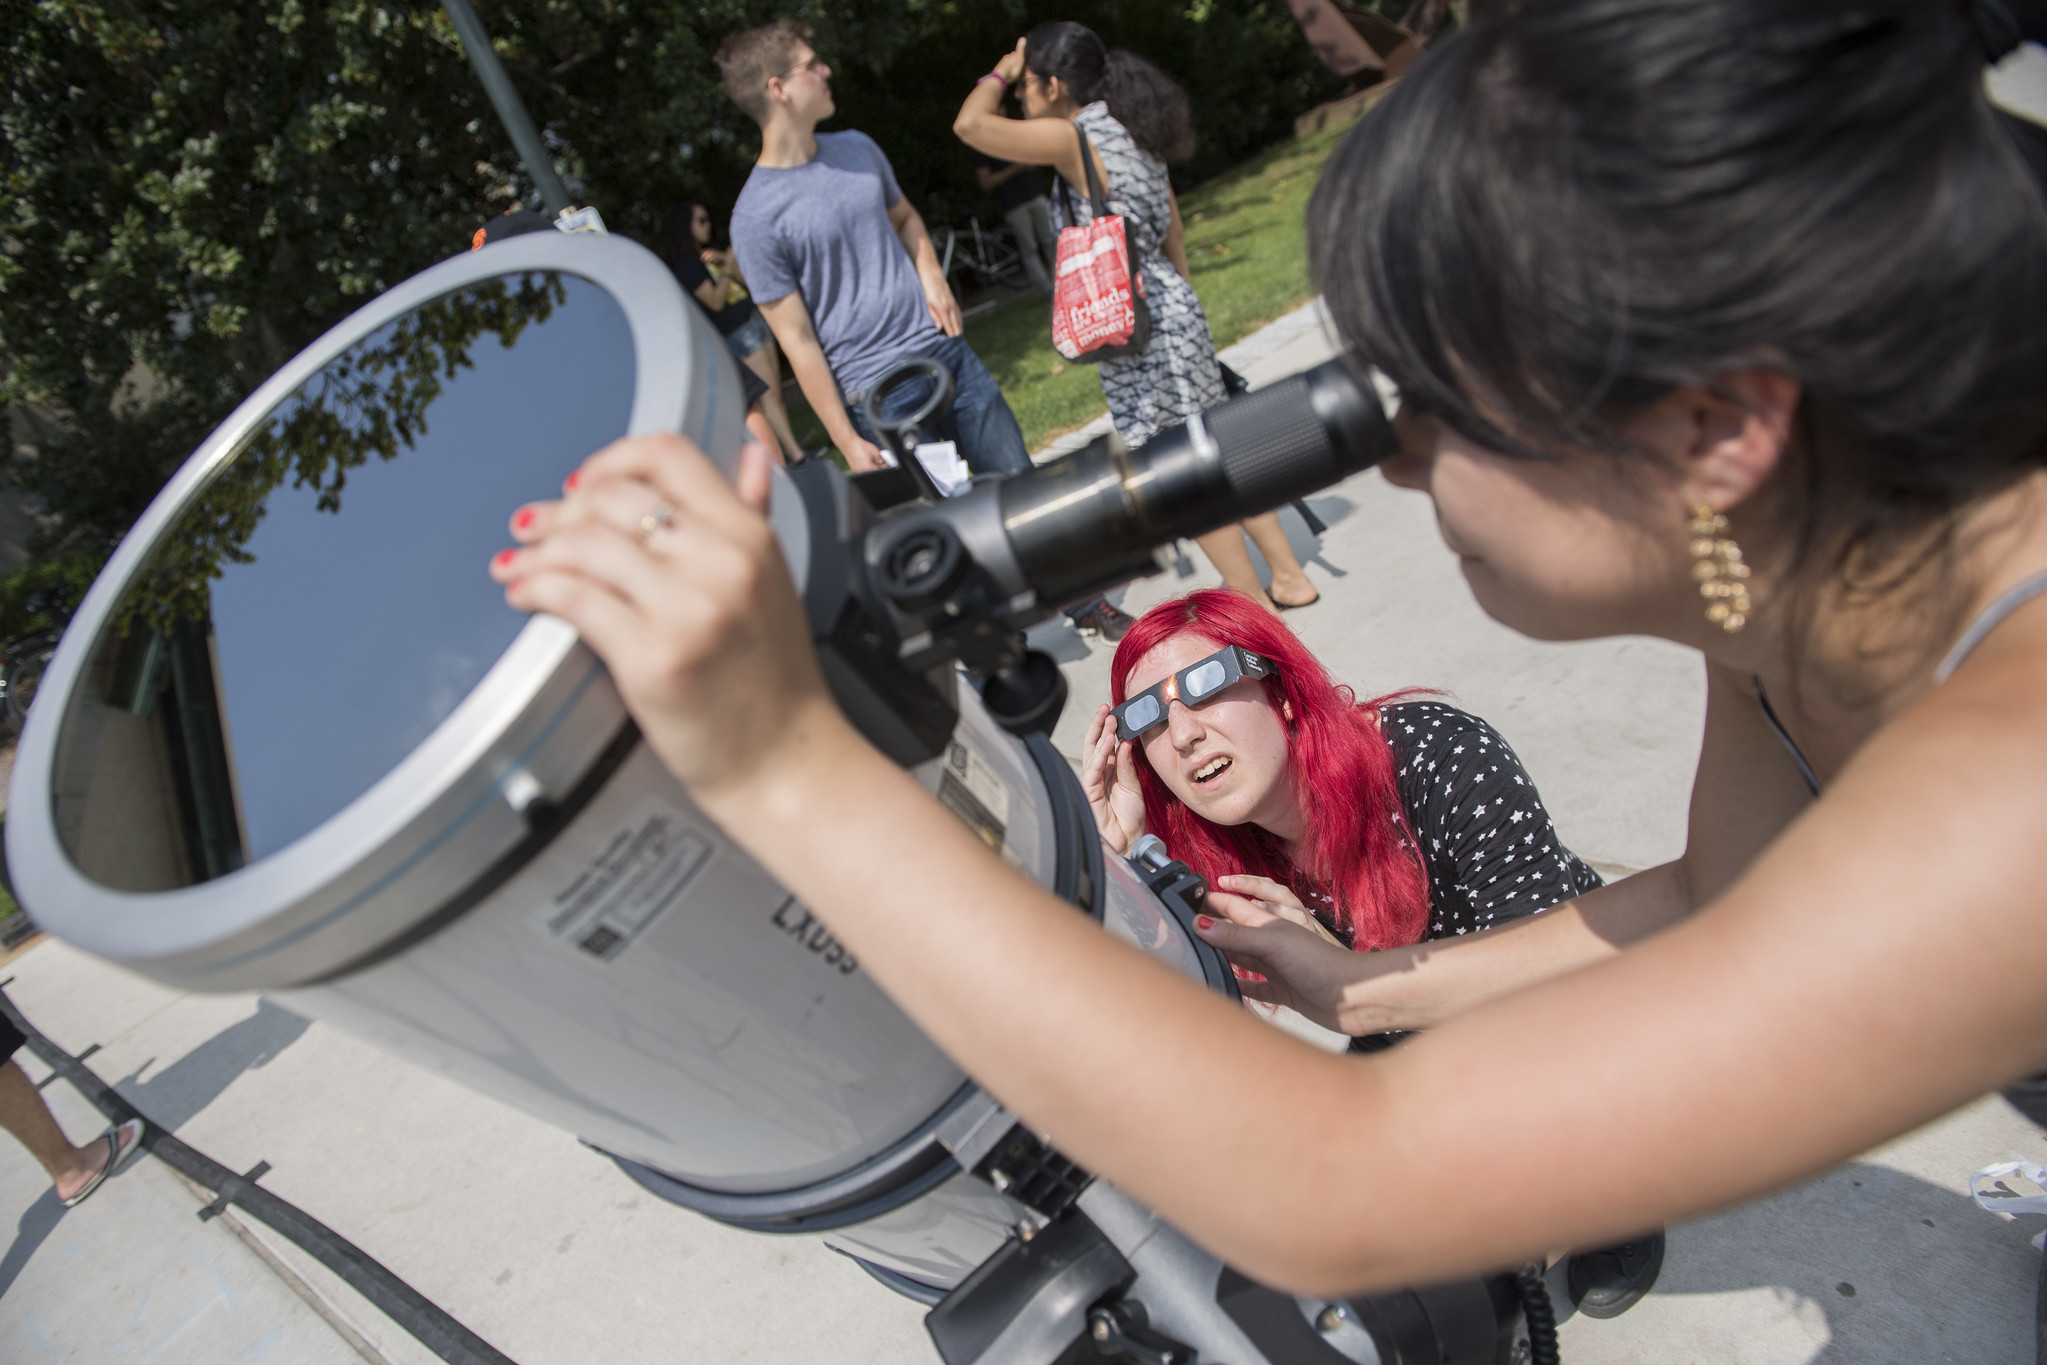 a student helps set up a specialized telescope during the August 21, 2017 eclipse, which passed over Pittsburgh